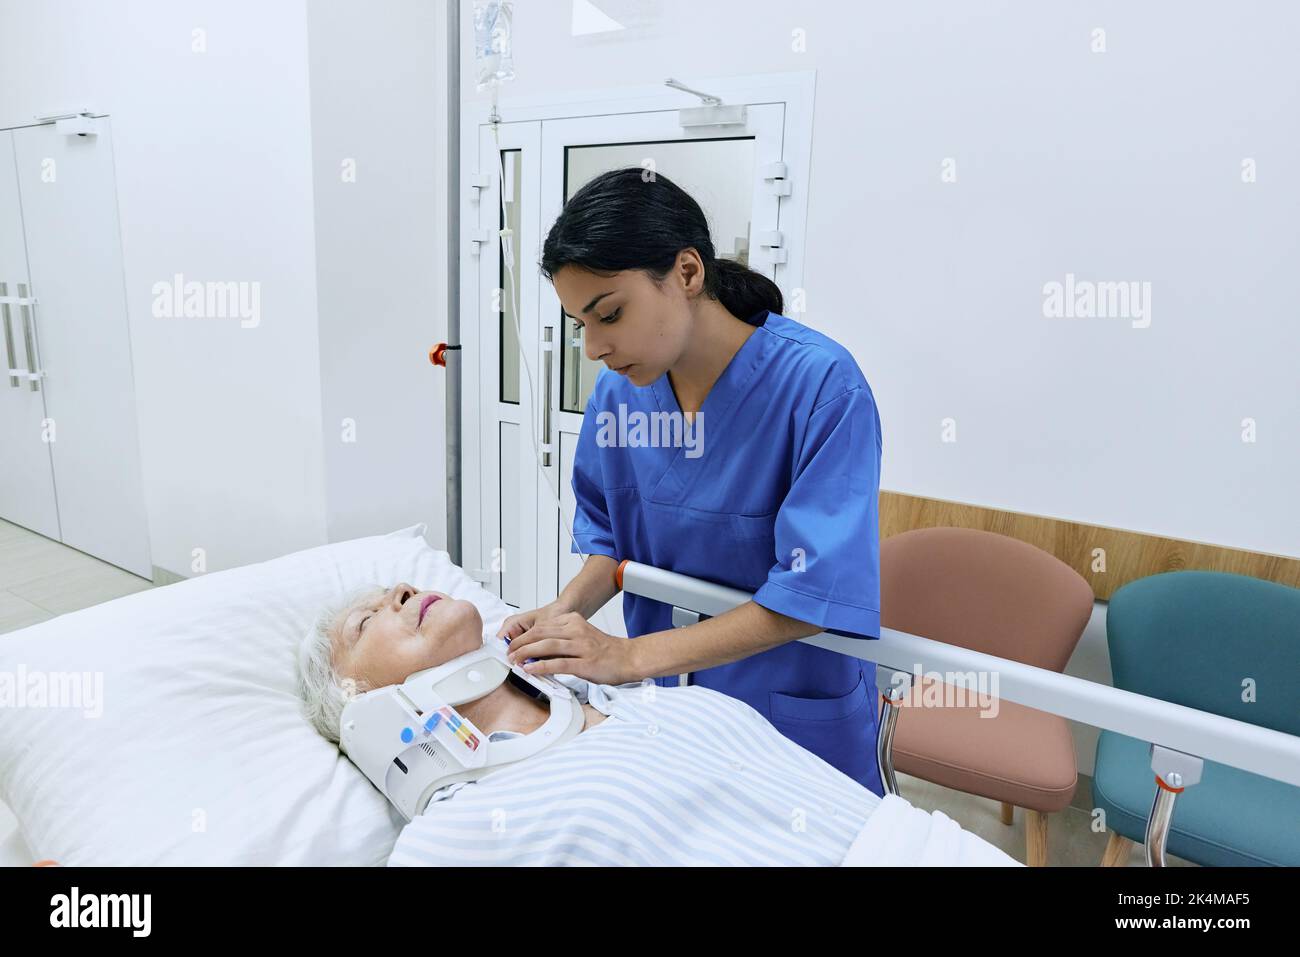 Nurse putting cervical collar on female injured neck lying on hospital gurney. Senior woman patient has acute spinal cord injury and is taken care of Stock Photo